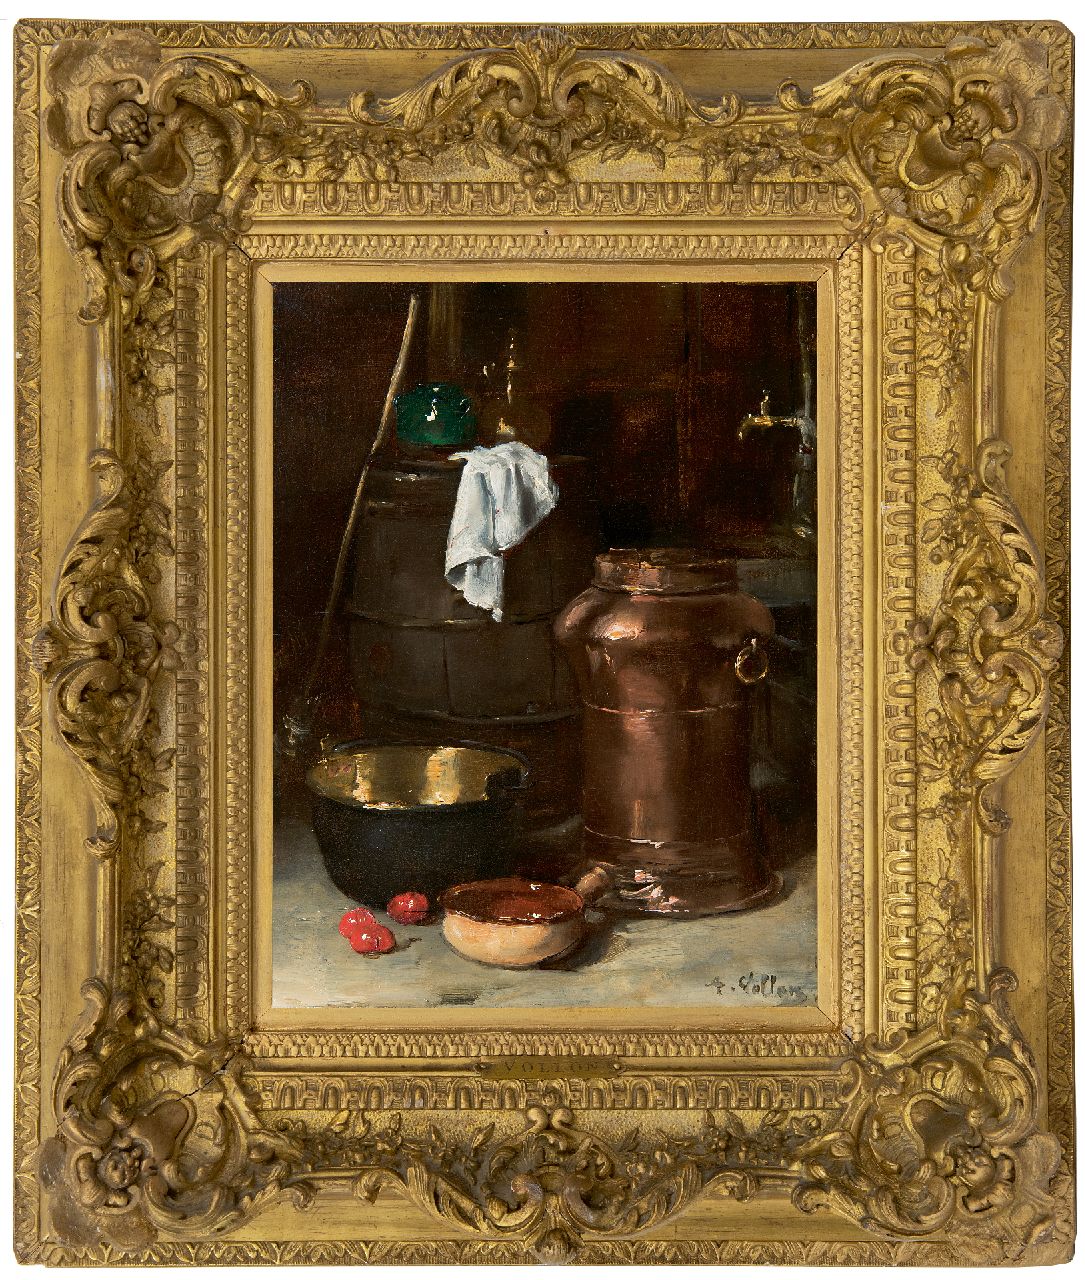 Vollon A.  | Antoine Vollon | Paintings offered for sale | Still life with a copper churn and brass pan, oil on panel 32.3 x 24.3 cm, signed l.r.